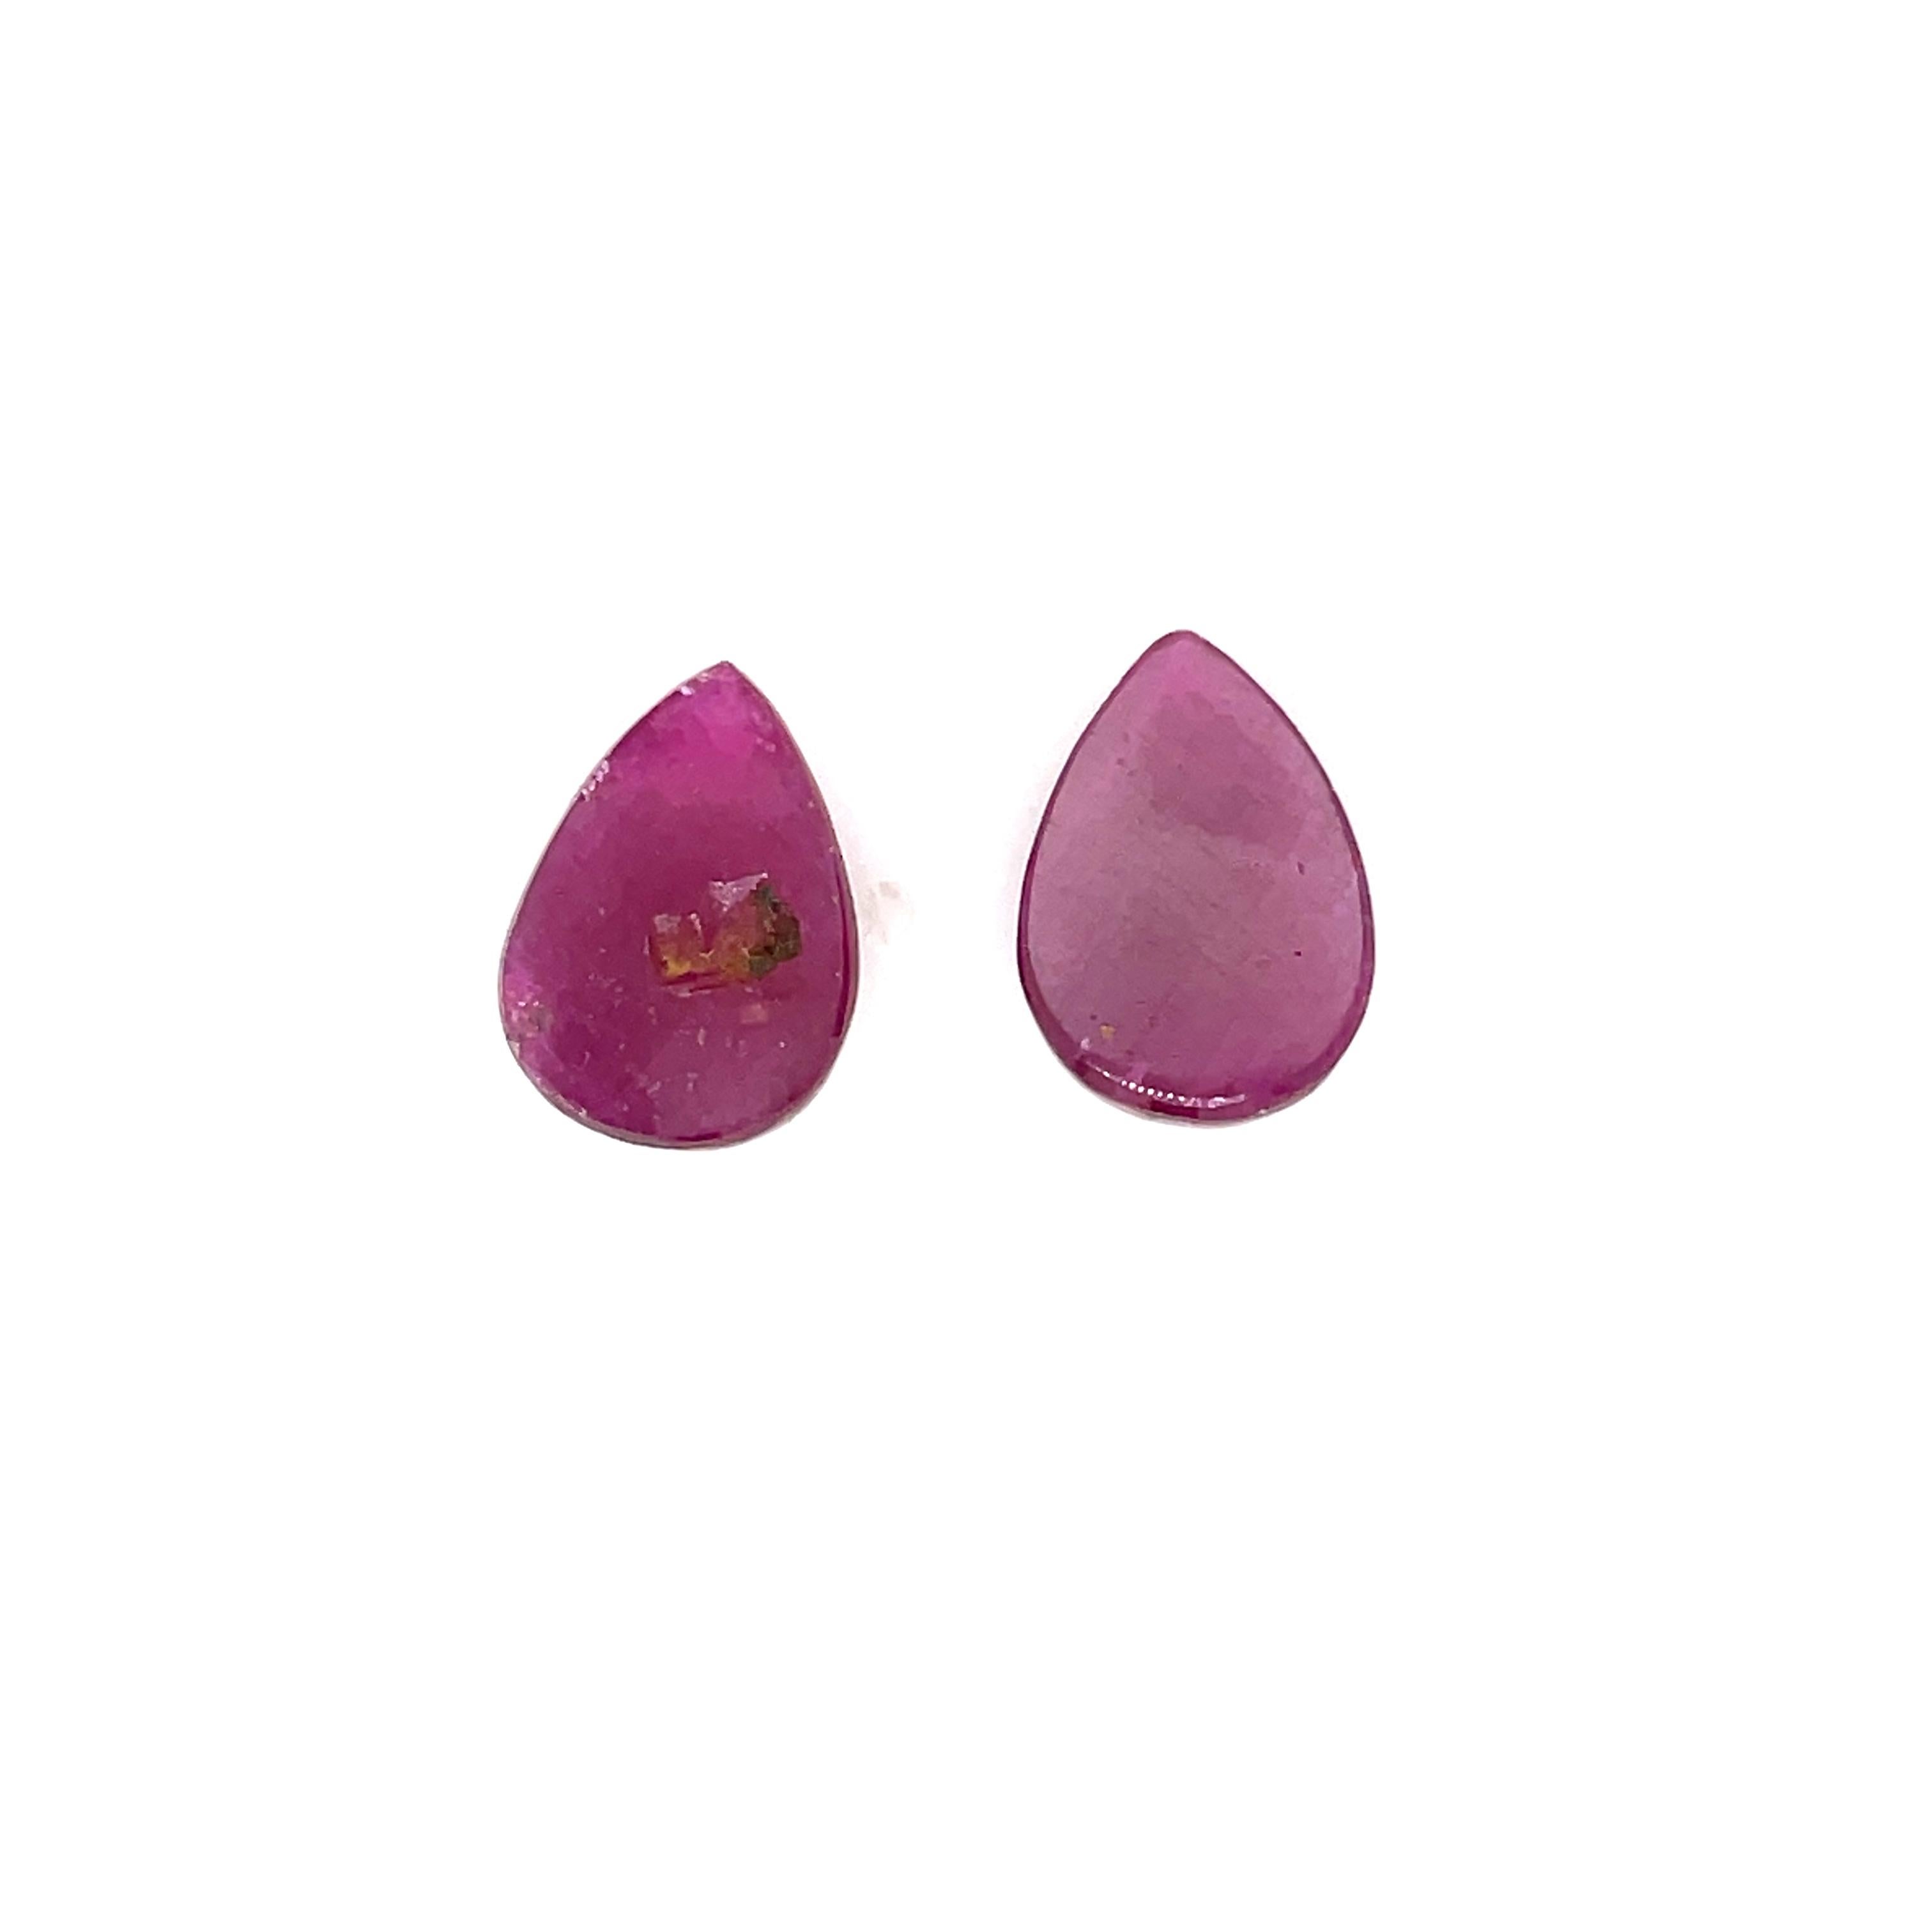 Sourced from the heart of India, these mesmerizing pear-shaped buff rubies boast a total weight of 20.22 carats, measuring 15.24 x 11.09 x 5.92 mm and 15.67 x 11.06 x 6.17 mm. 

These exquisite gems, untouched by heat treatments, exude a natural